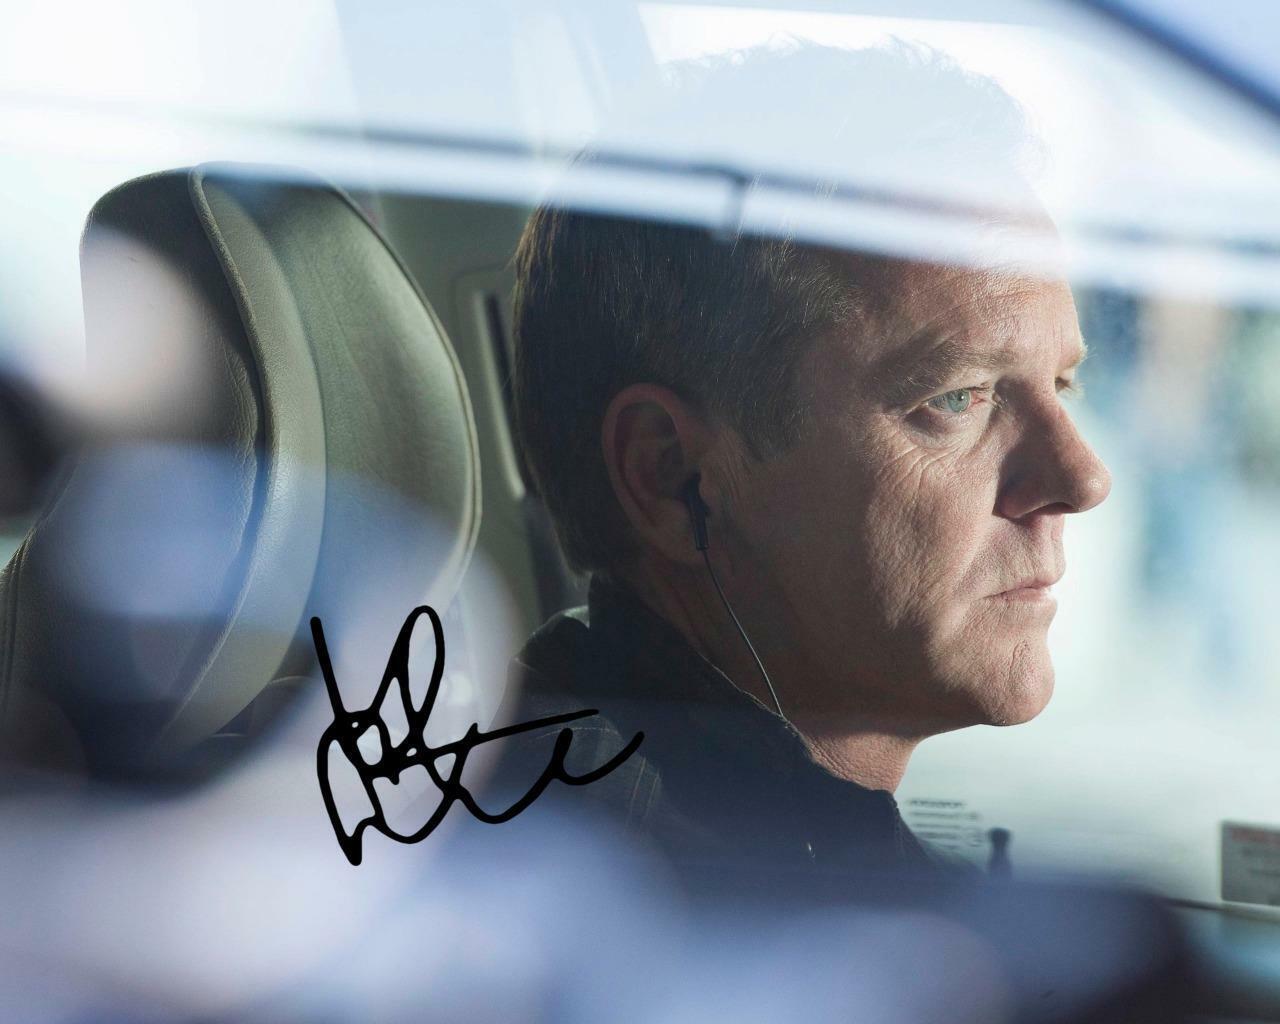 KIEFER SUTHERLAND 24 live another day SIGNED AUTOGRAPHED 10X8 REPRO Photo Poster painting PRINT